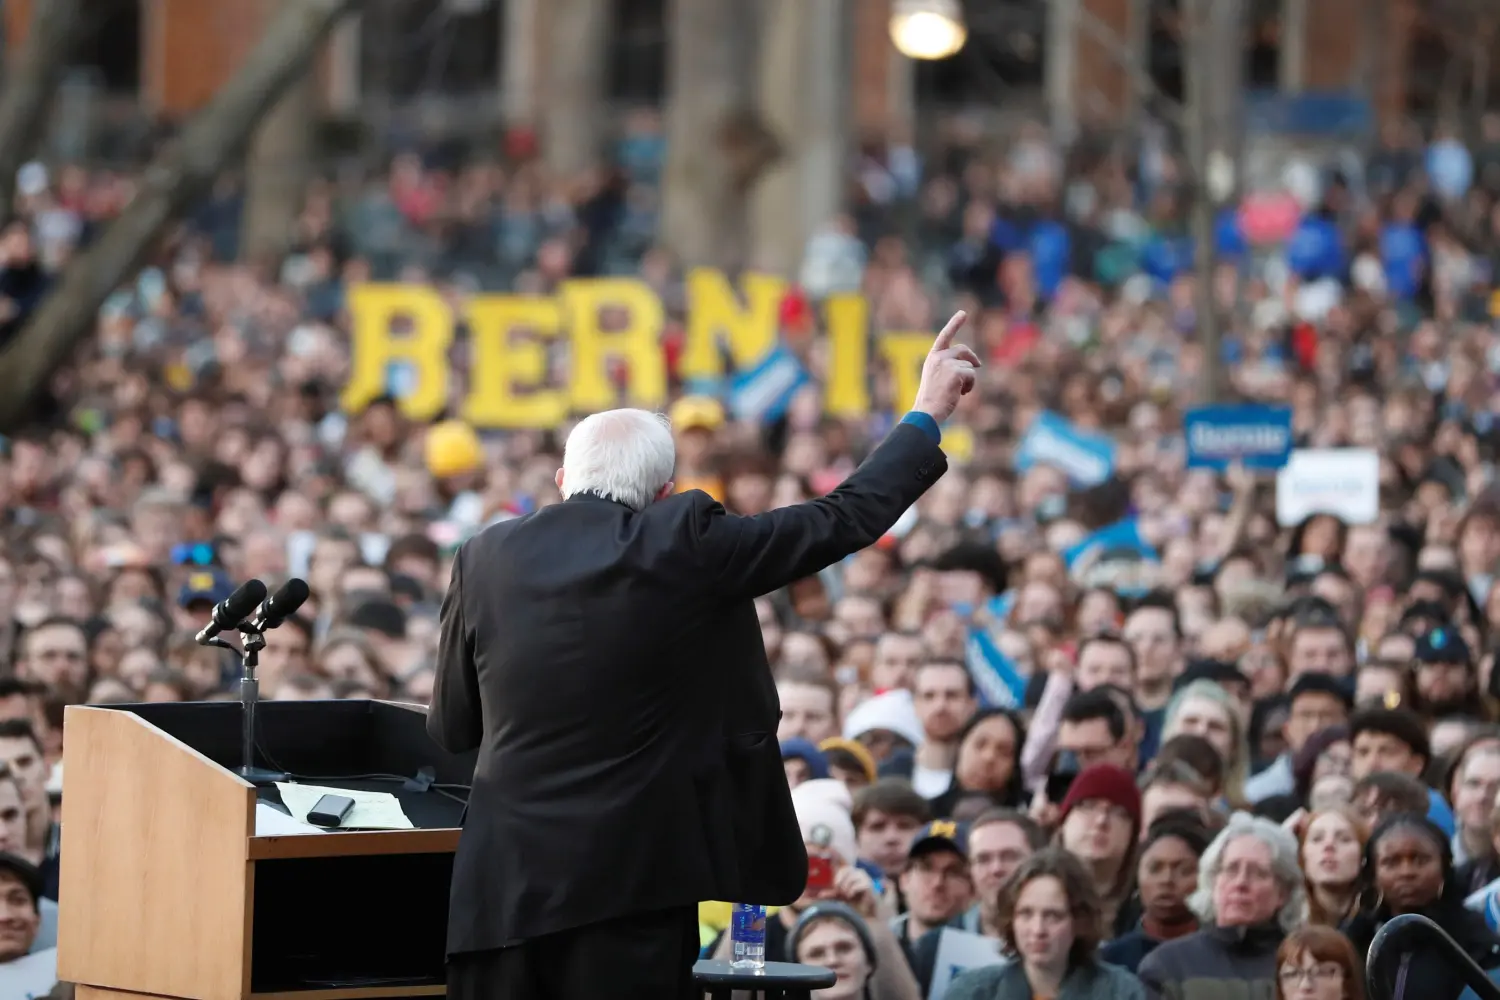 U.S. Democratic presidential candidate Bernie Sanders speaks during a rally at the University of Michigan in Ann Arbor, Michigan, U.S.,March 8, 2020. REUTERS/Lucas Jackson